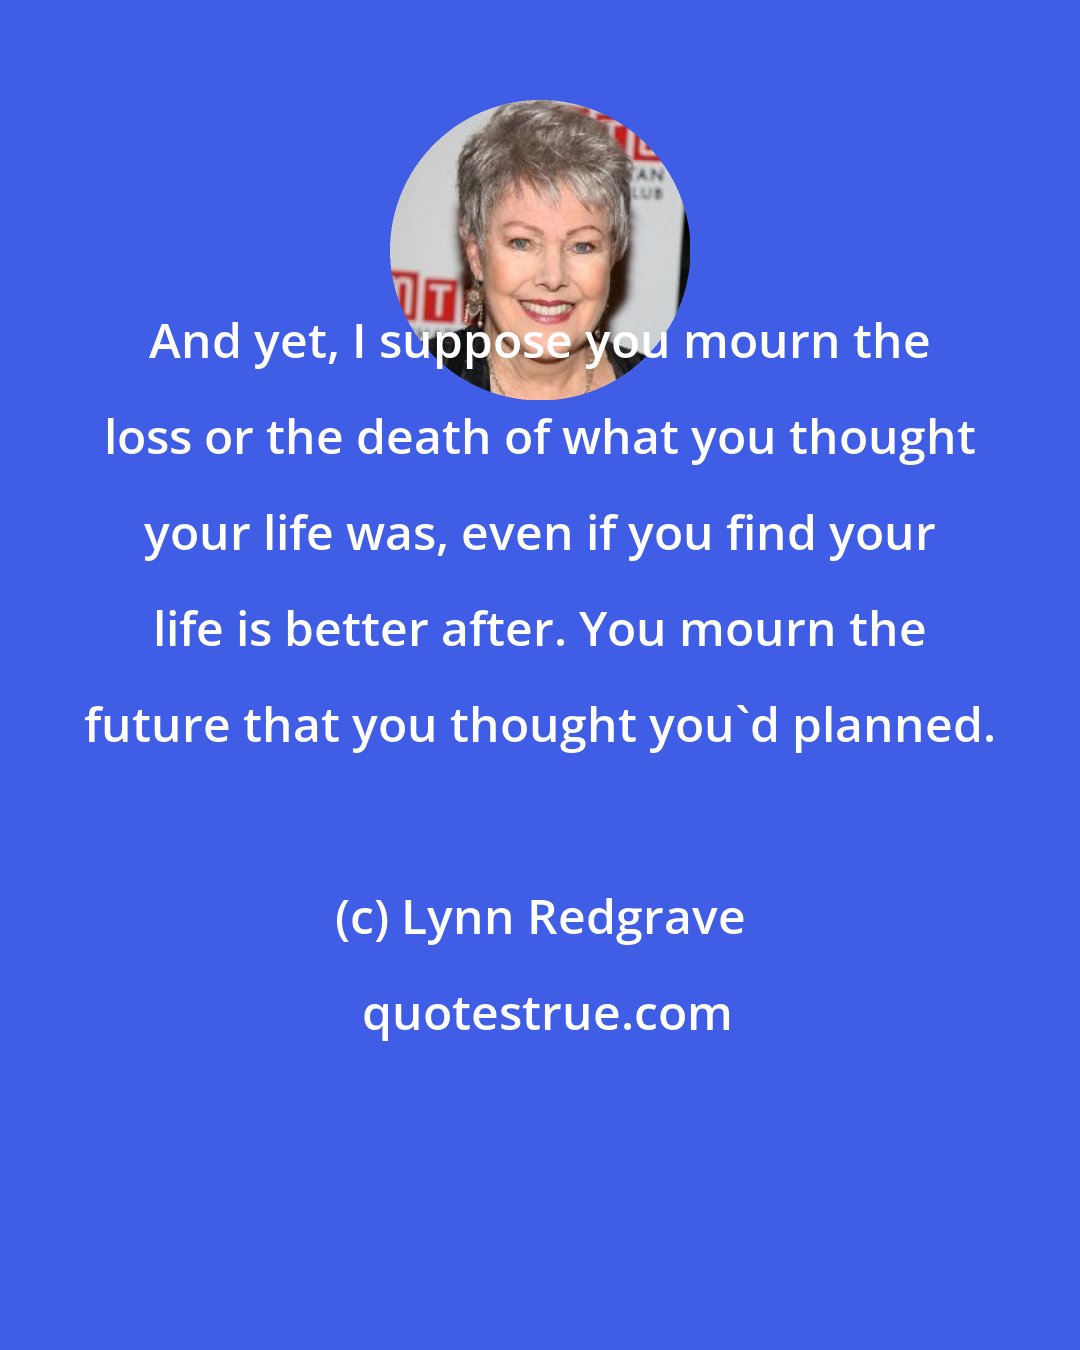 Lynn Redgrave: And yet, I suppose you mourn the loss or the death of what you thought your life was, even if you find your life is better after. You mourn the future that you thought you'd planned.